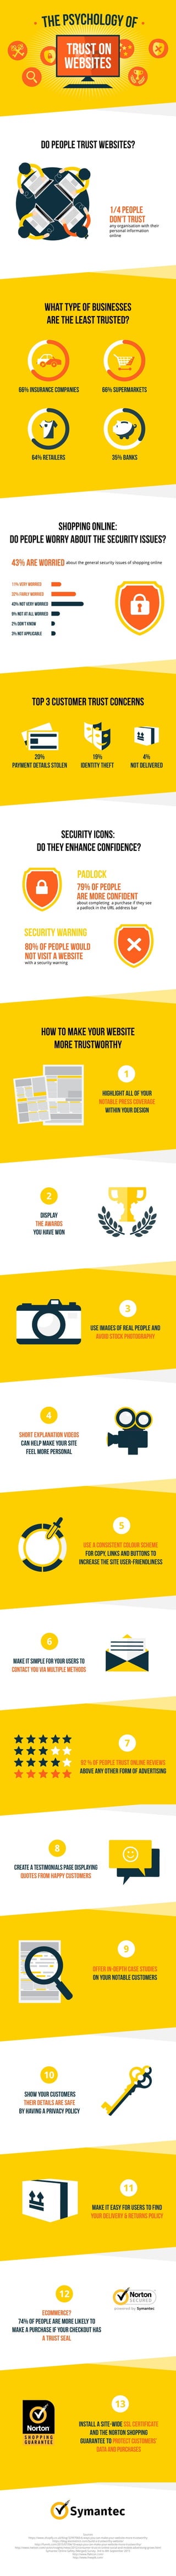 Symantec Infographic: The psychology of trust in websites